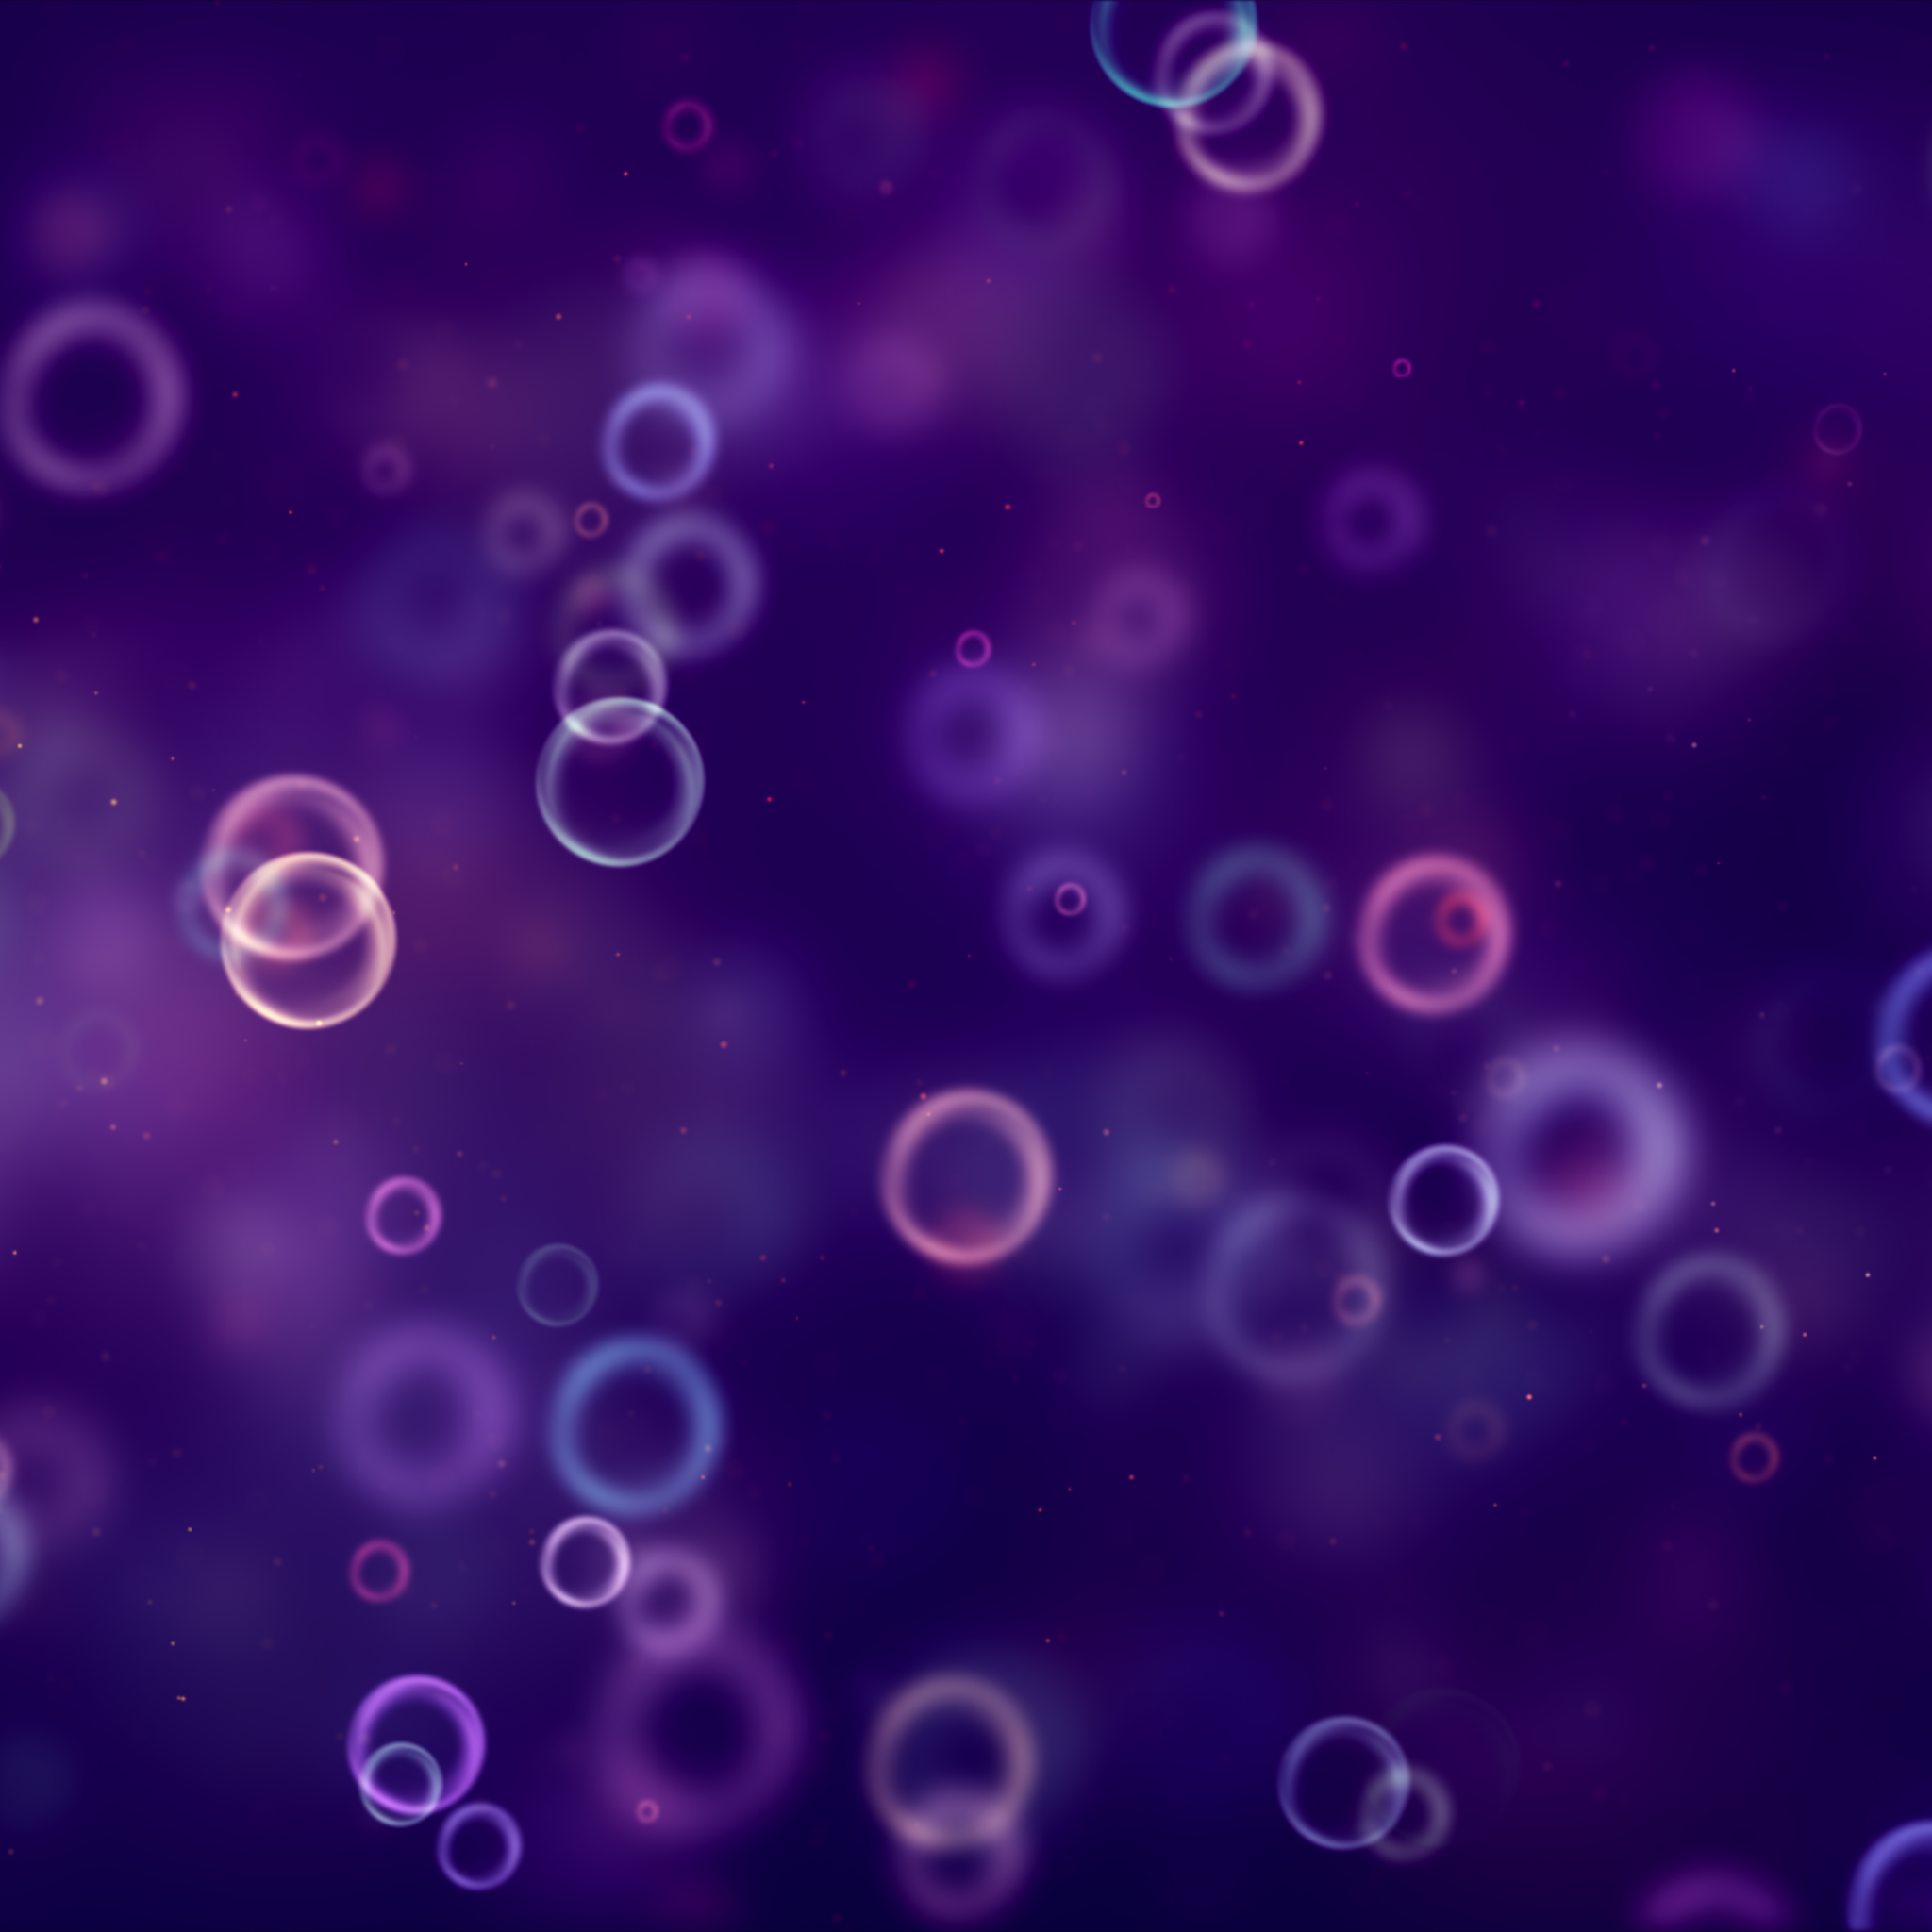 Water Bubbles Photos Download The BEST Free Water Bubbles Stock Photos   HD Images